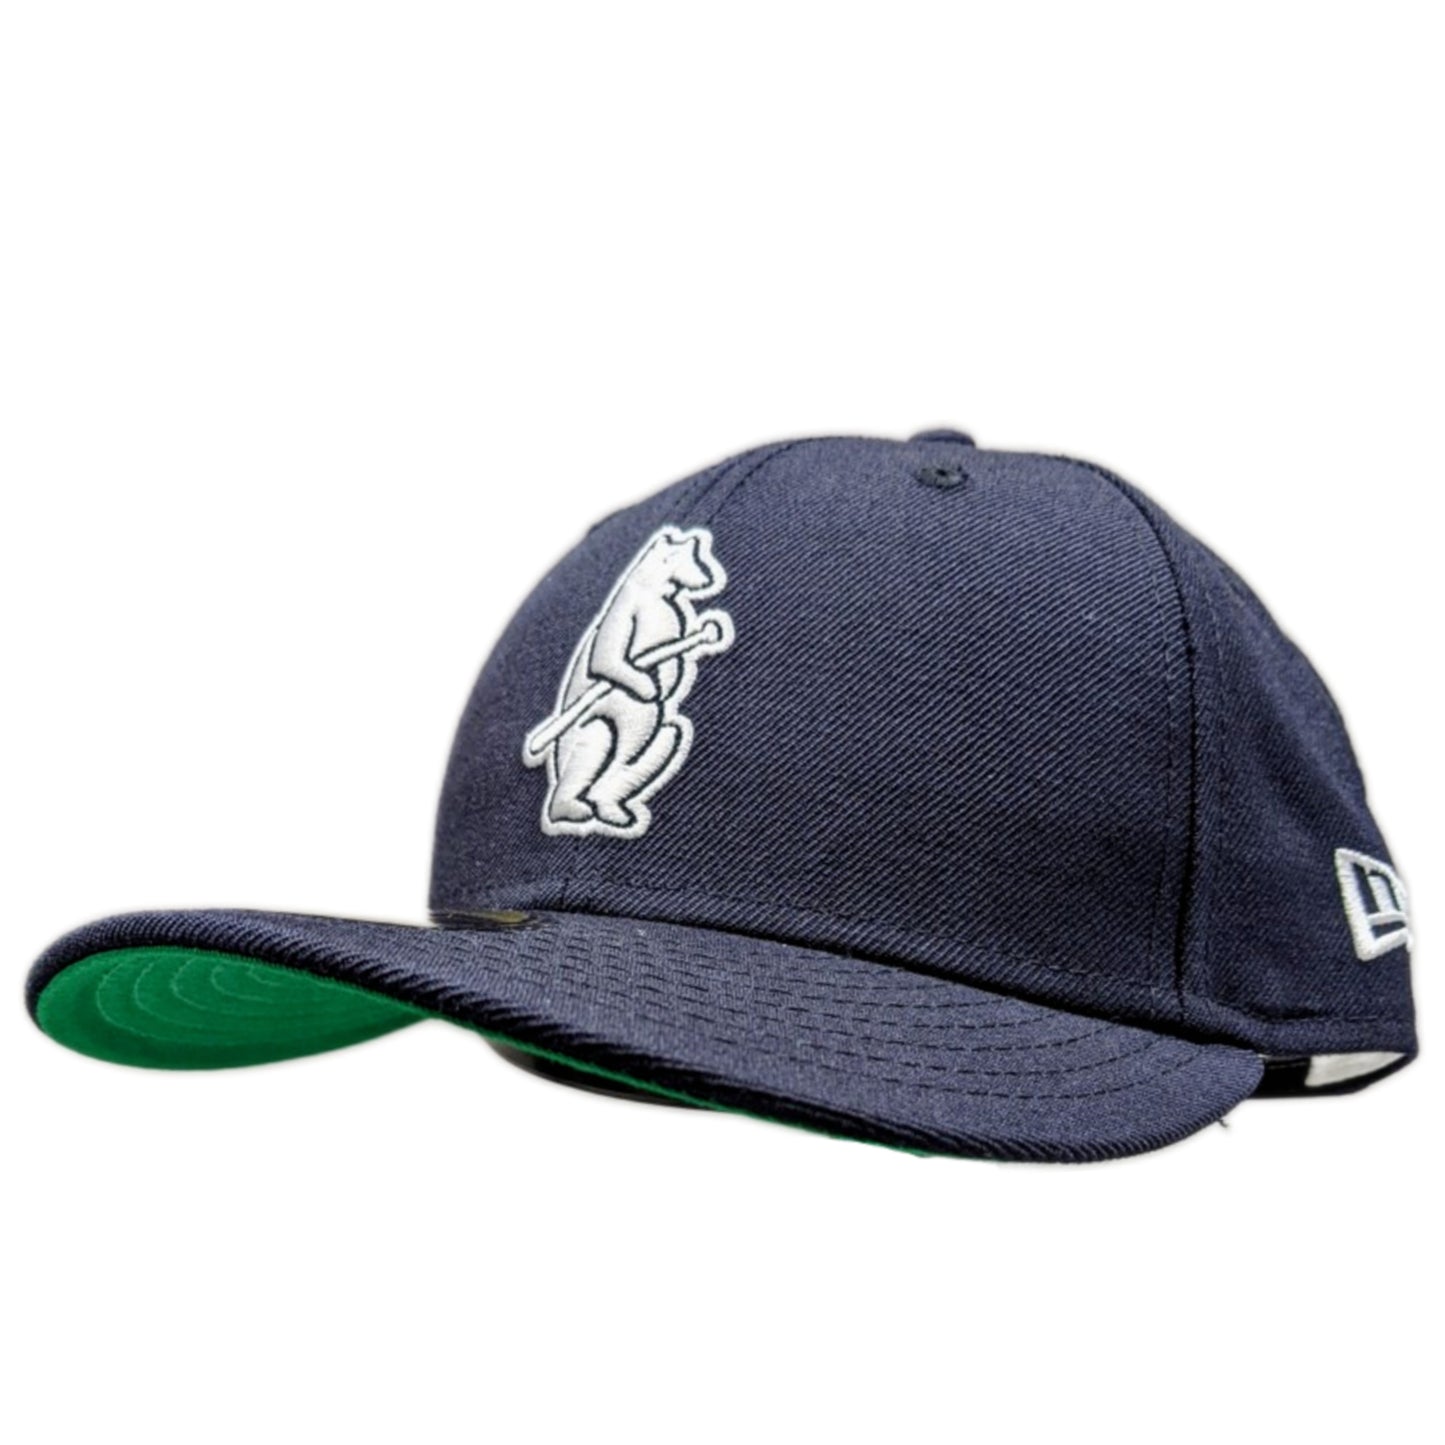 Men's Chicago Cubs Cooperstown Collection Navy Low Profile 59FIFTY Cap